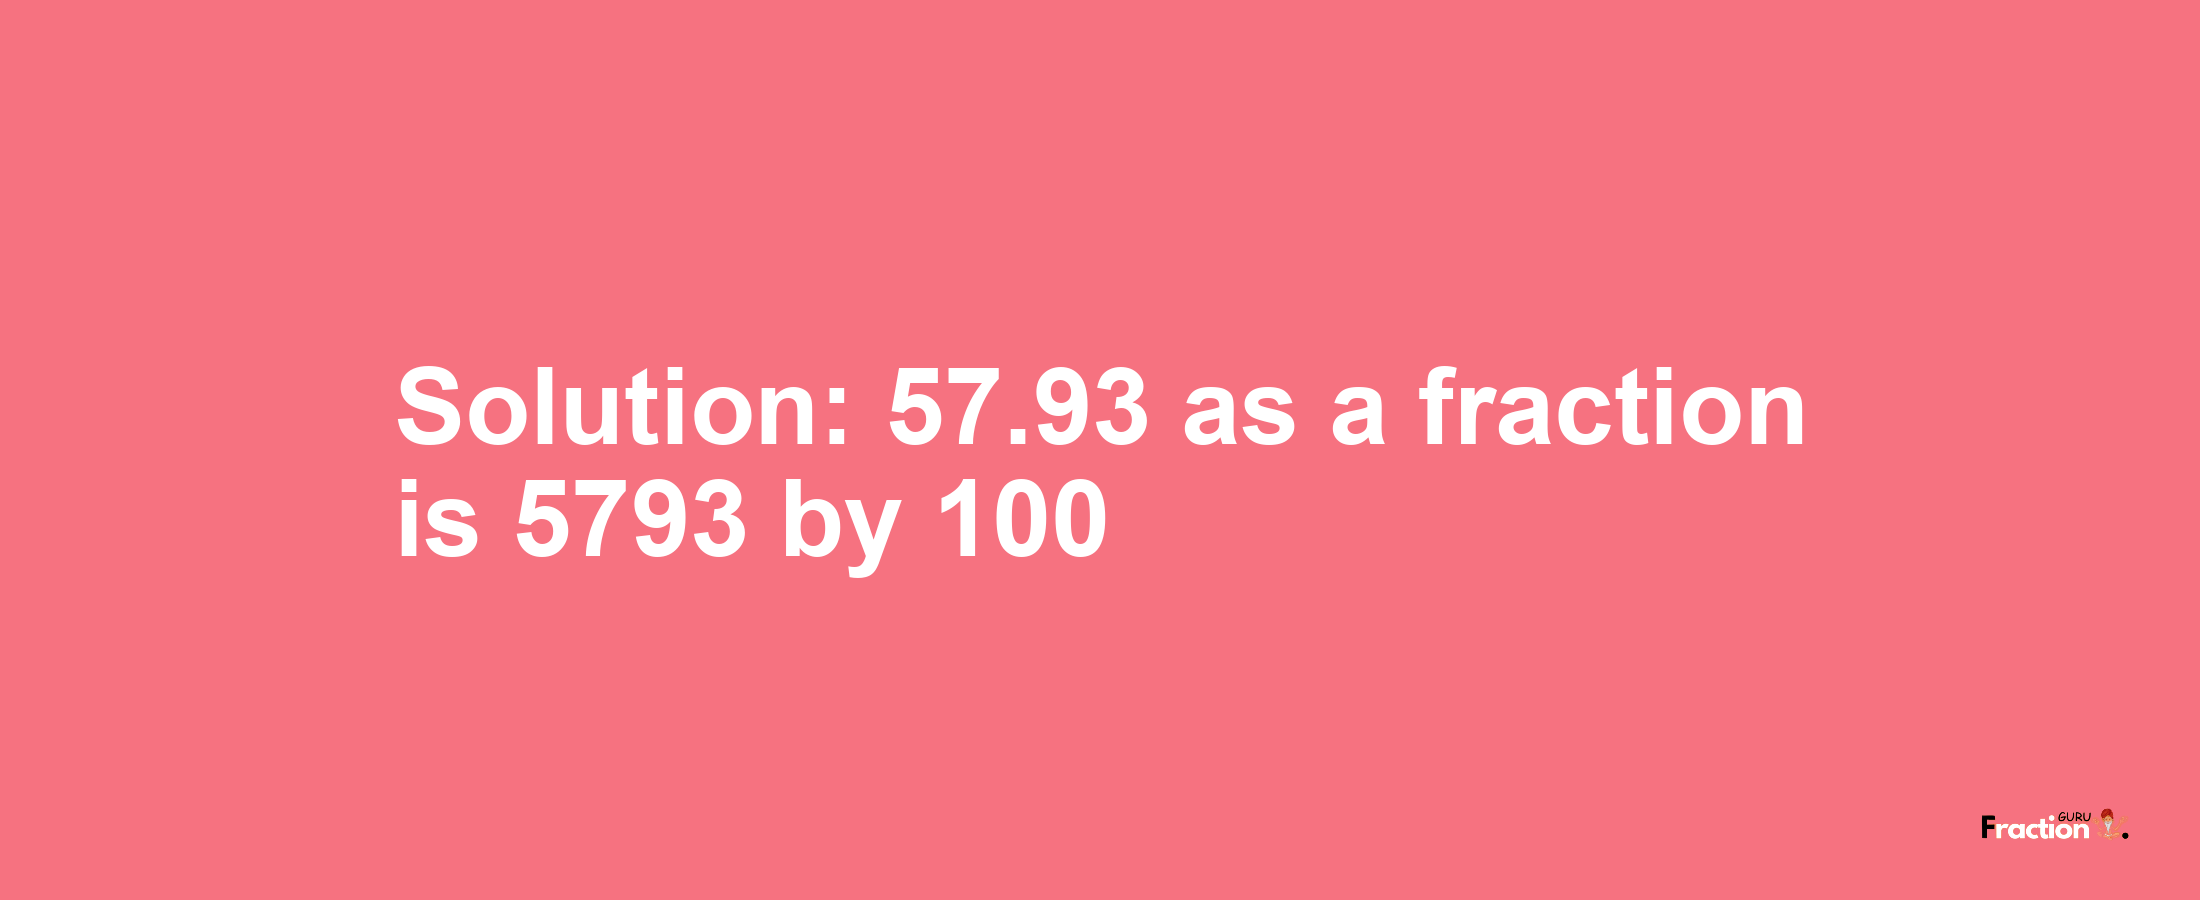 Solution:57.93 as a fraction is 5793/100